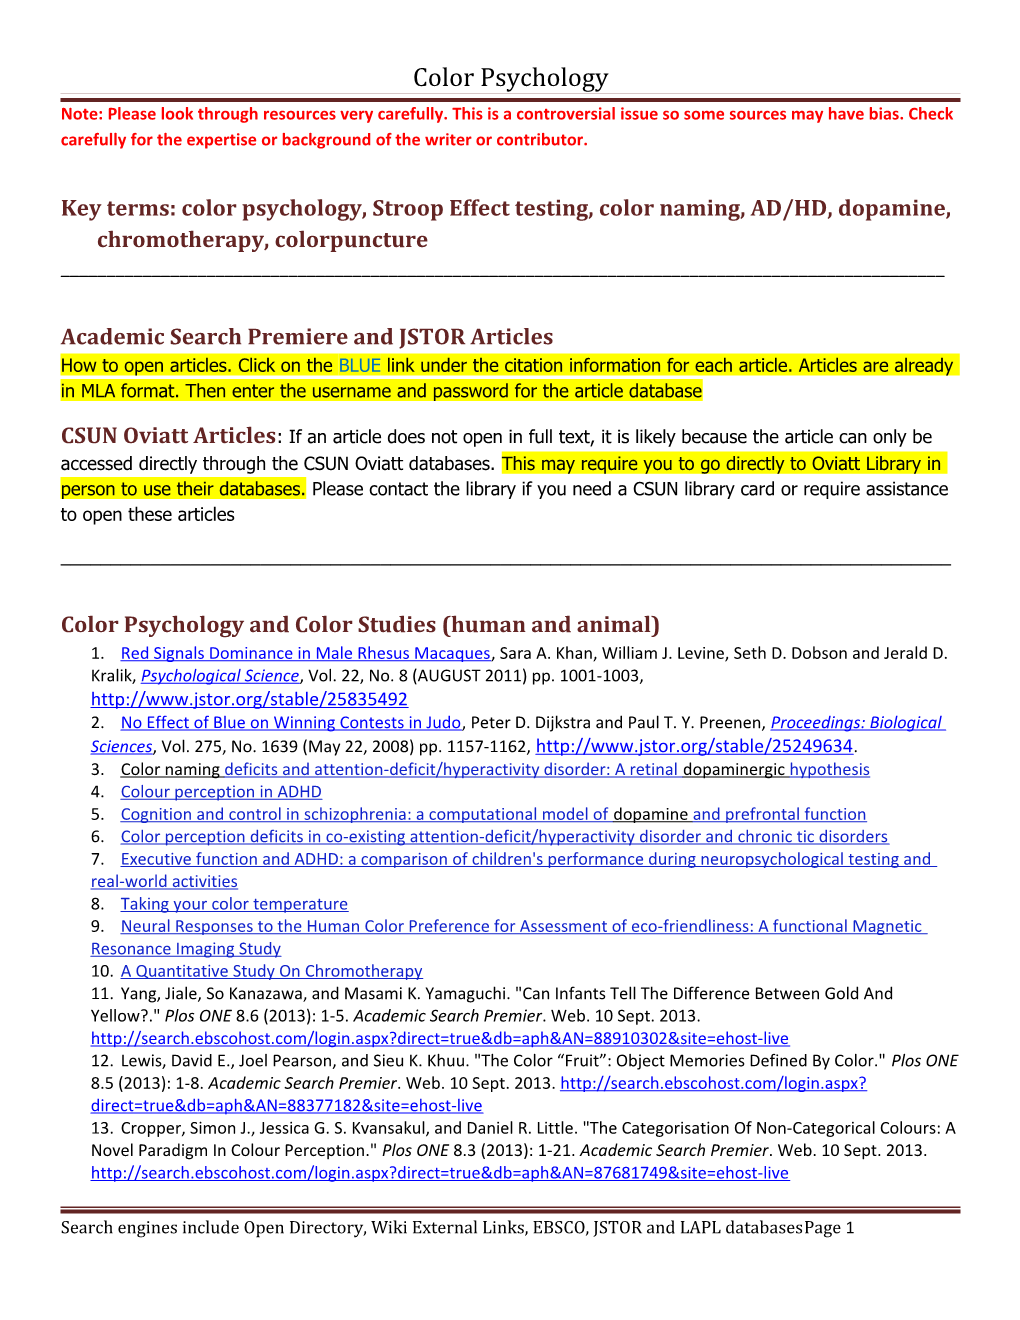 Academic Search Premiere and JSTOR Articles